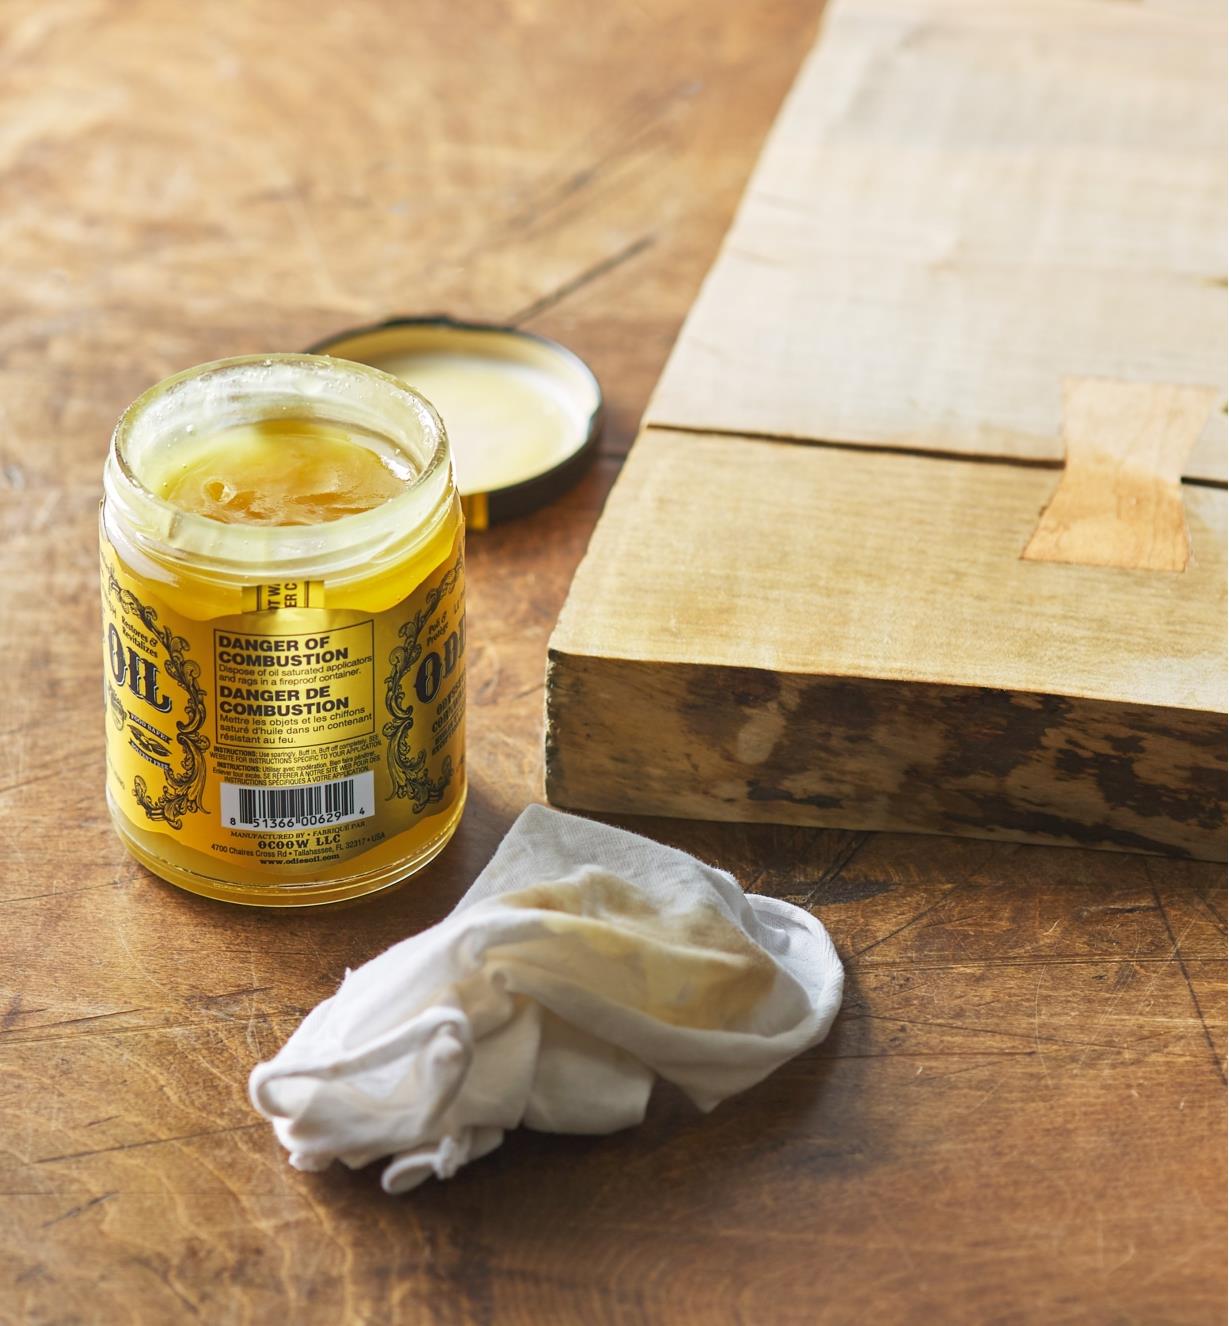 An open jar of Odie’s Oil next to a white cloth and a half-treated plank of wood